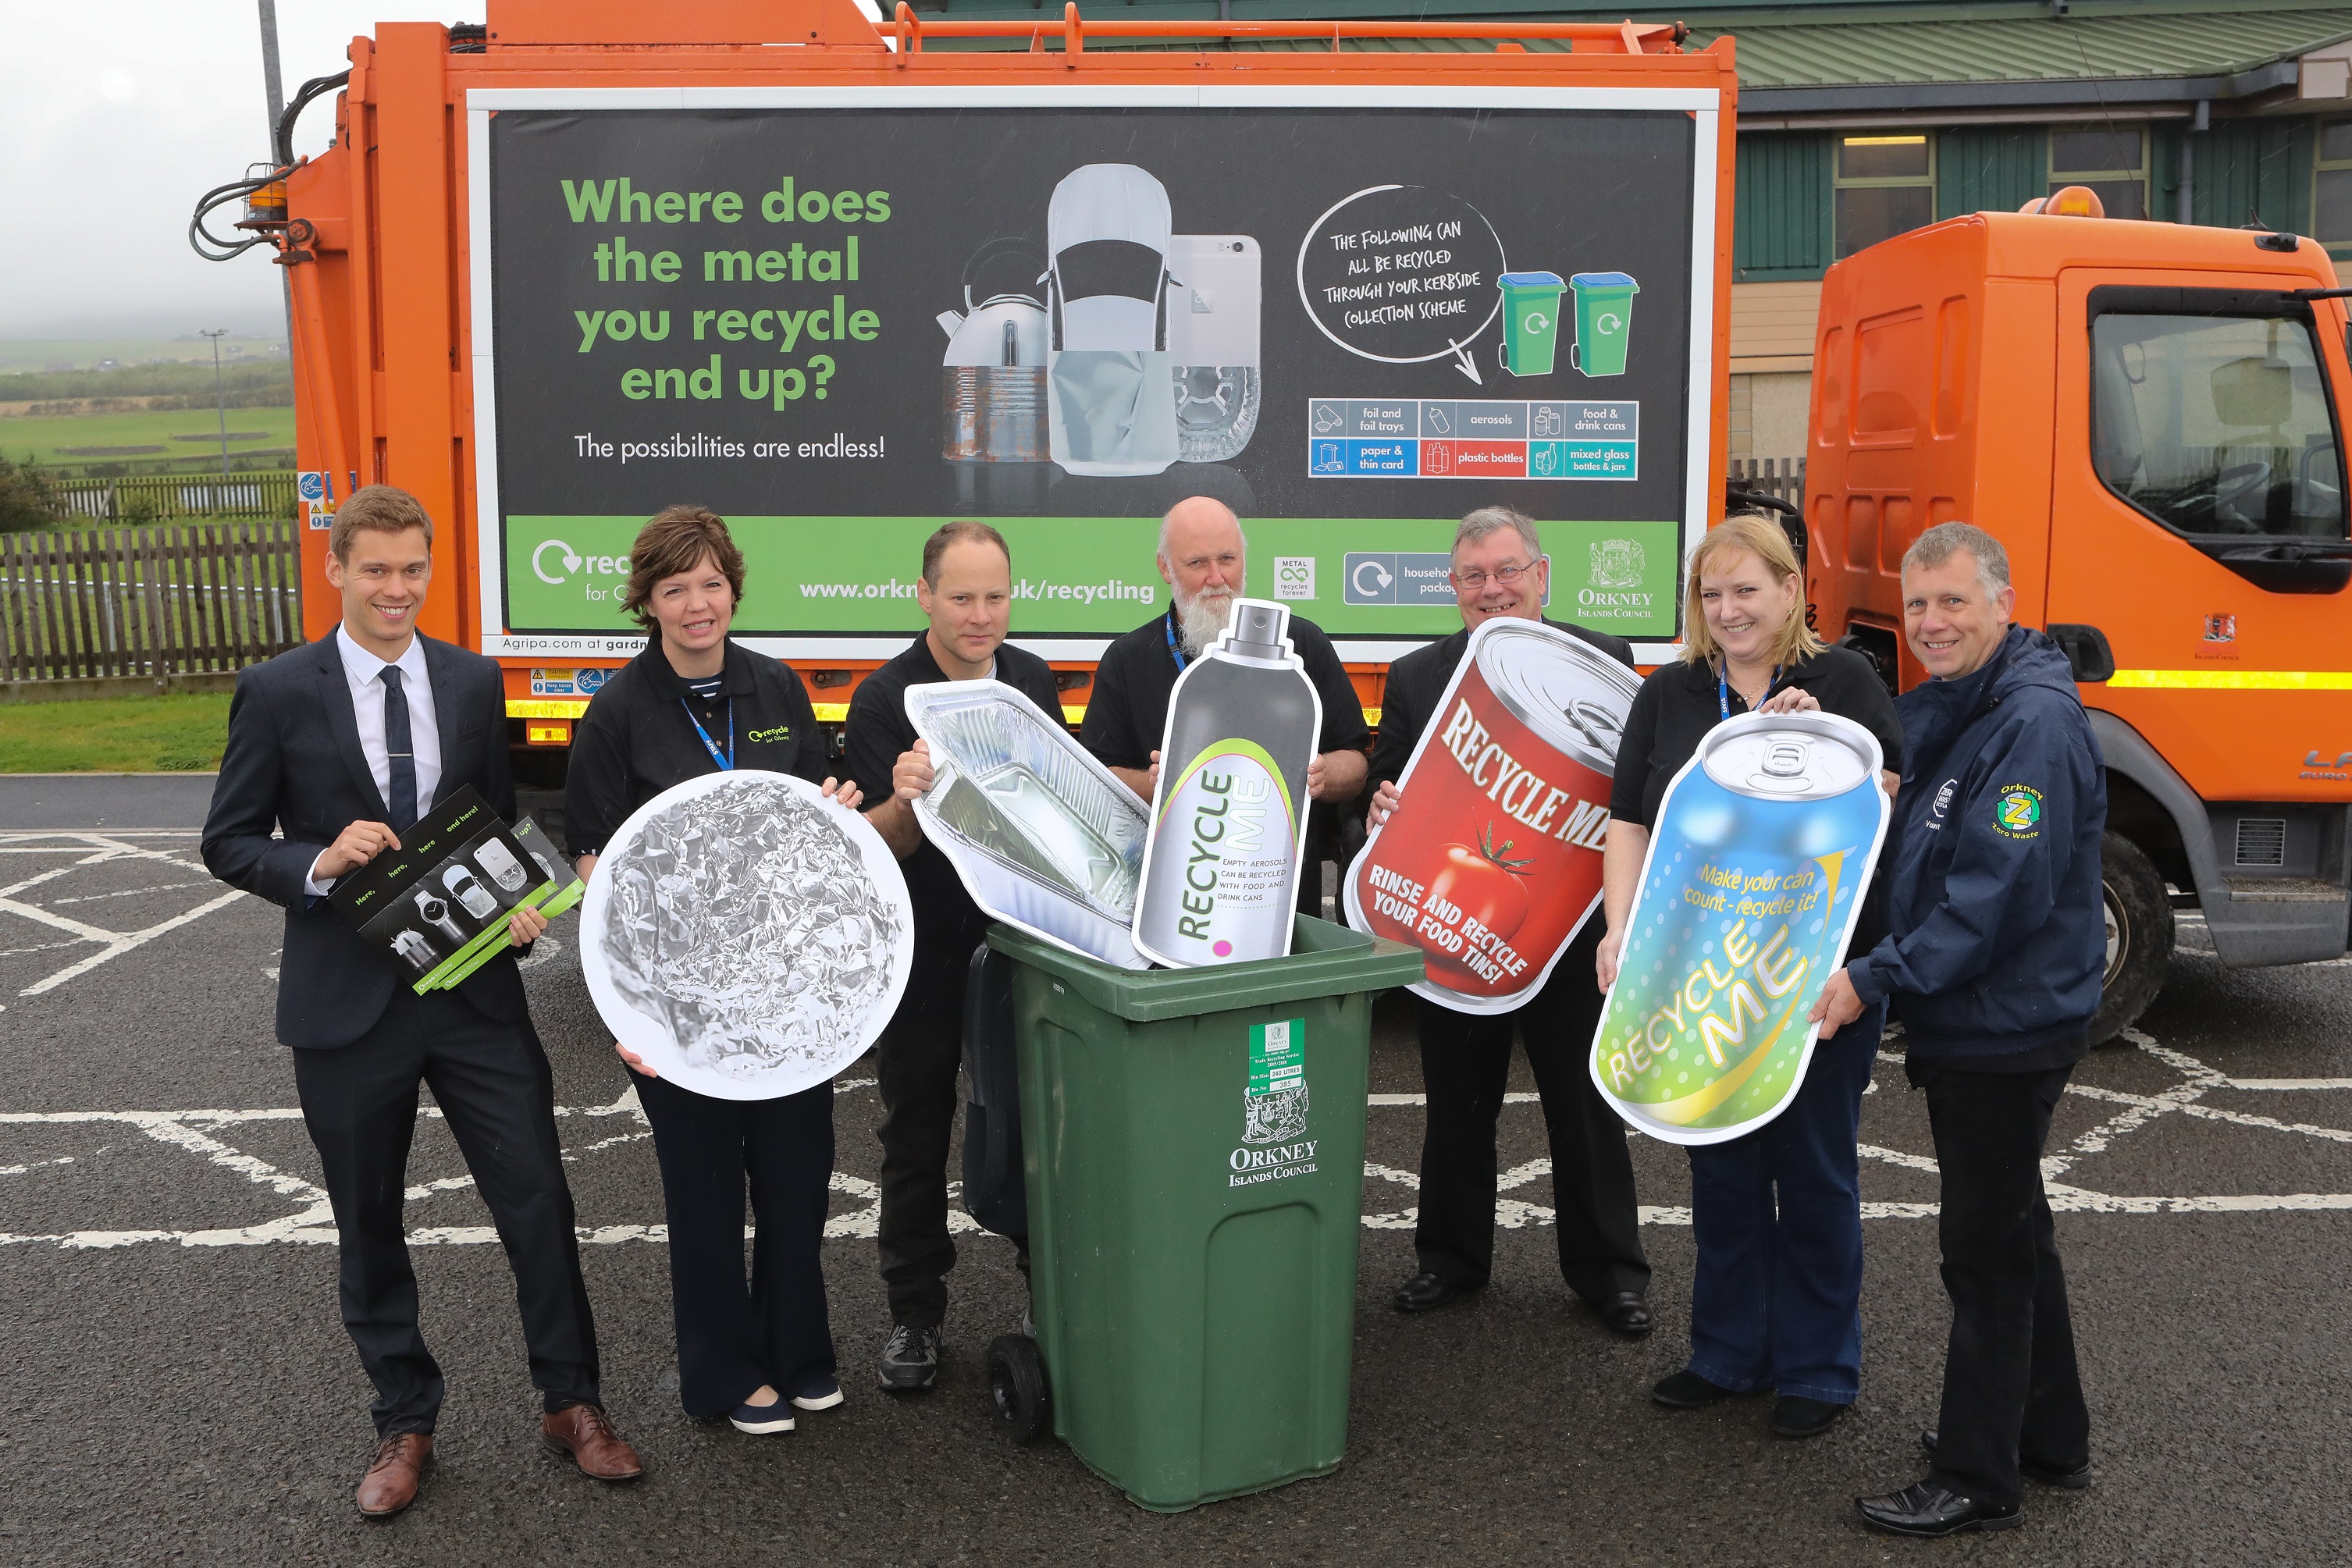 A group of representatives from MetalMatters and Orkney Council holding cardboard cut-outs of metal packaging items in front of one of their recycling vehicles which bears the MetalMatters signage artwork.